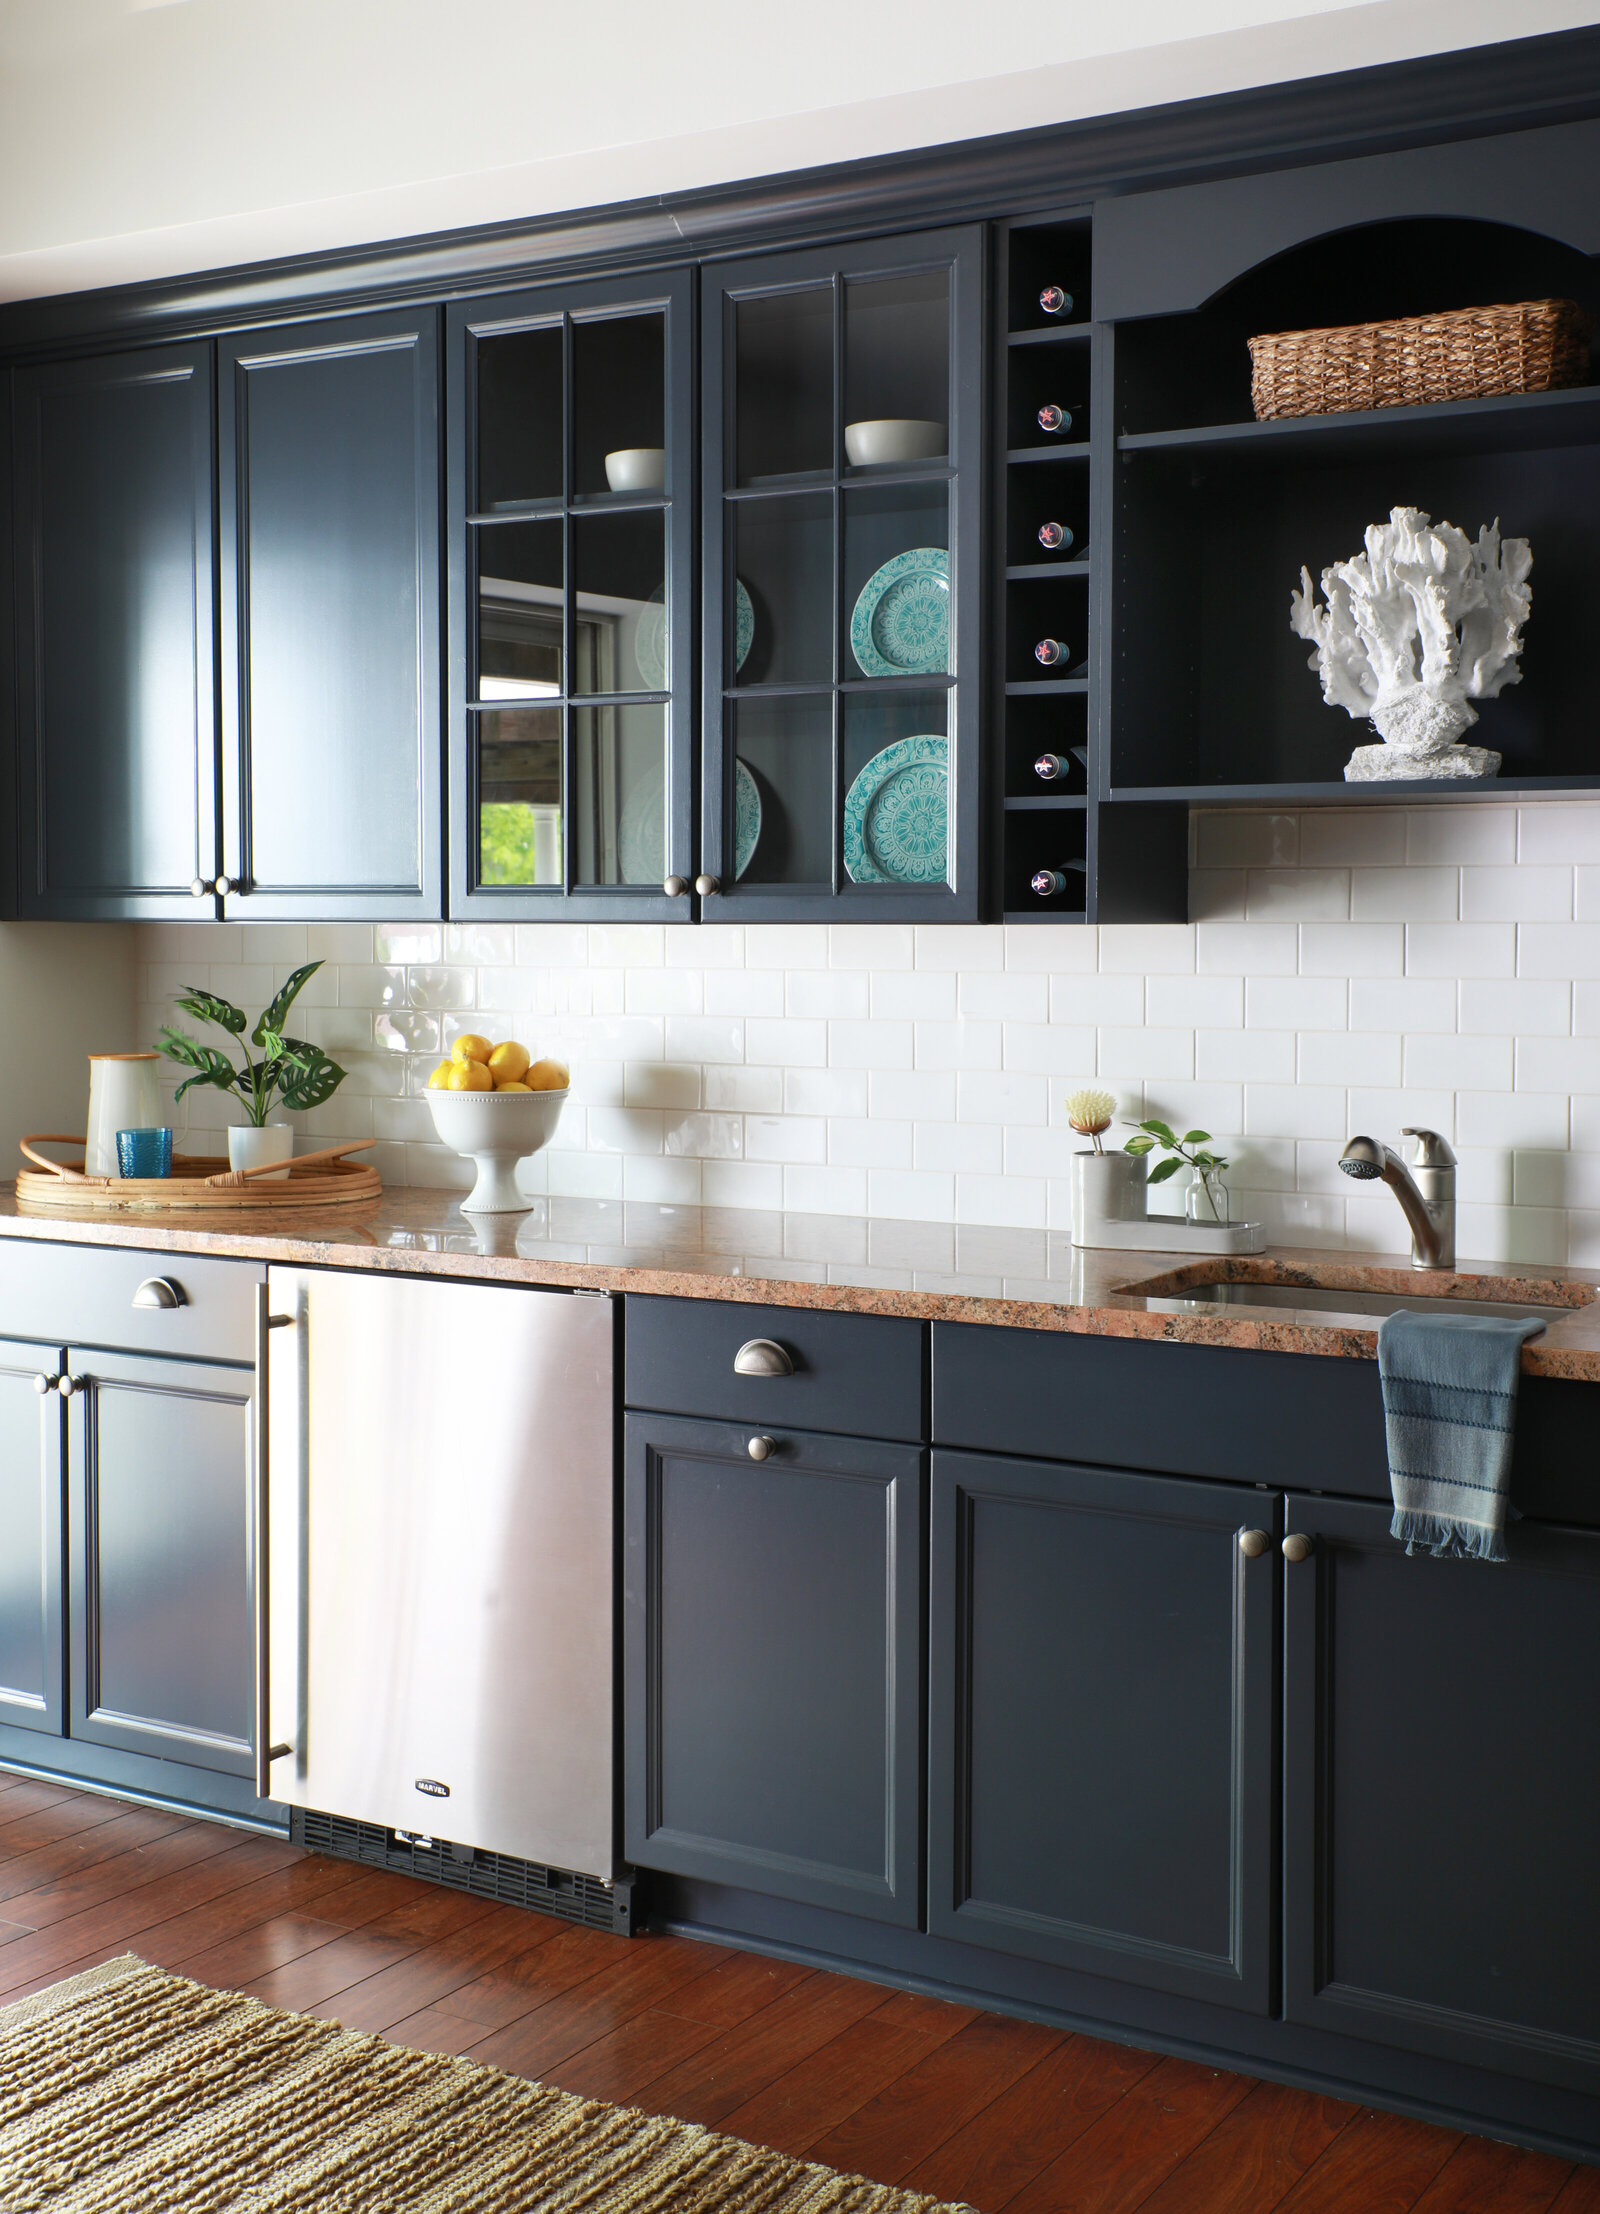 PAINTED-HALE-NAVY-KITCHEN-CABINETS-STYLED